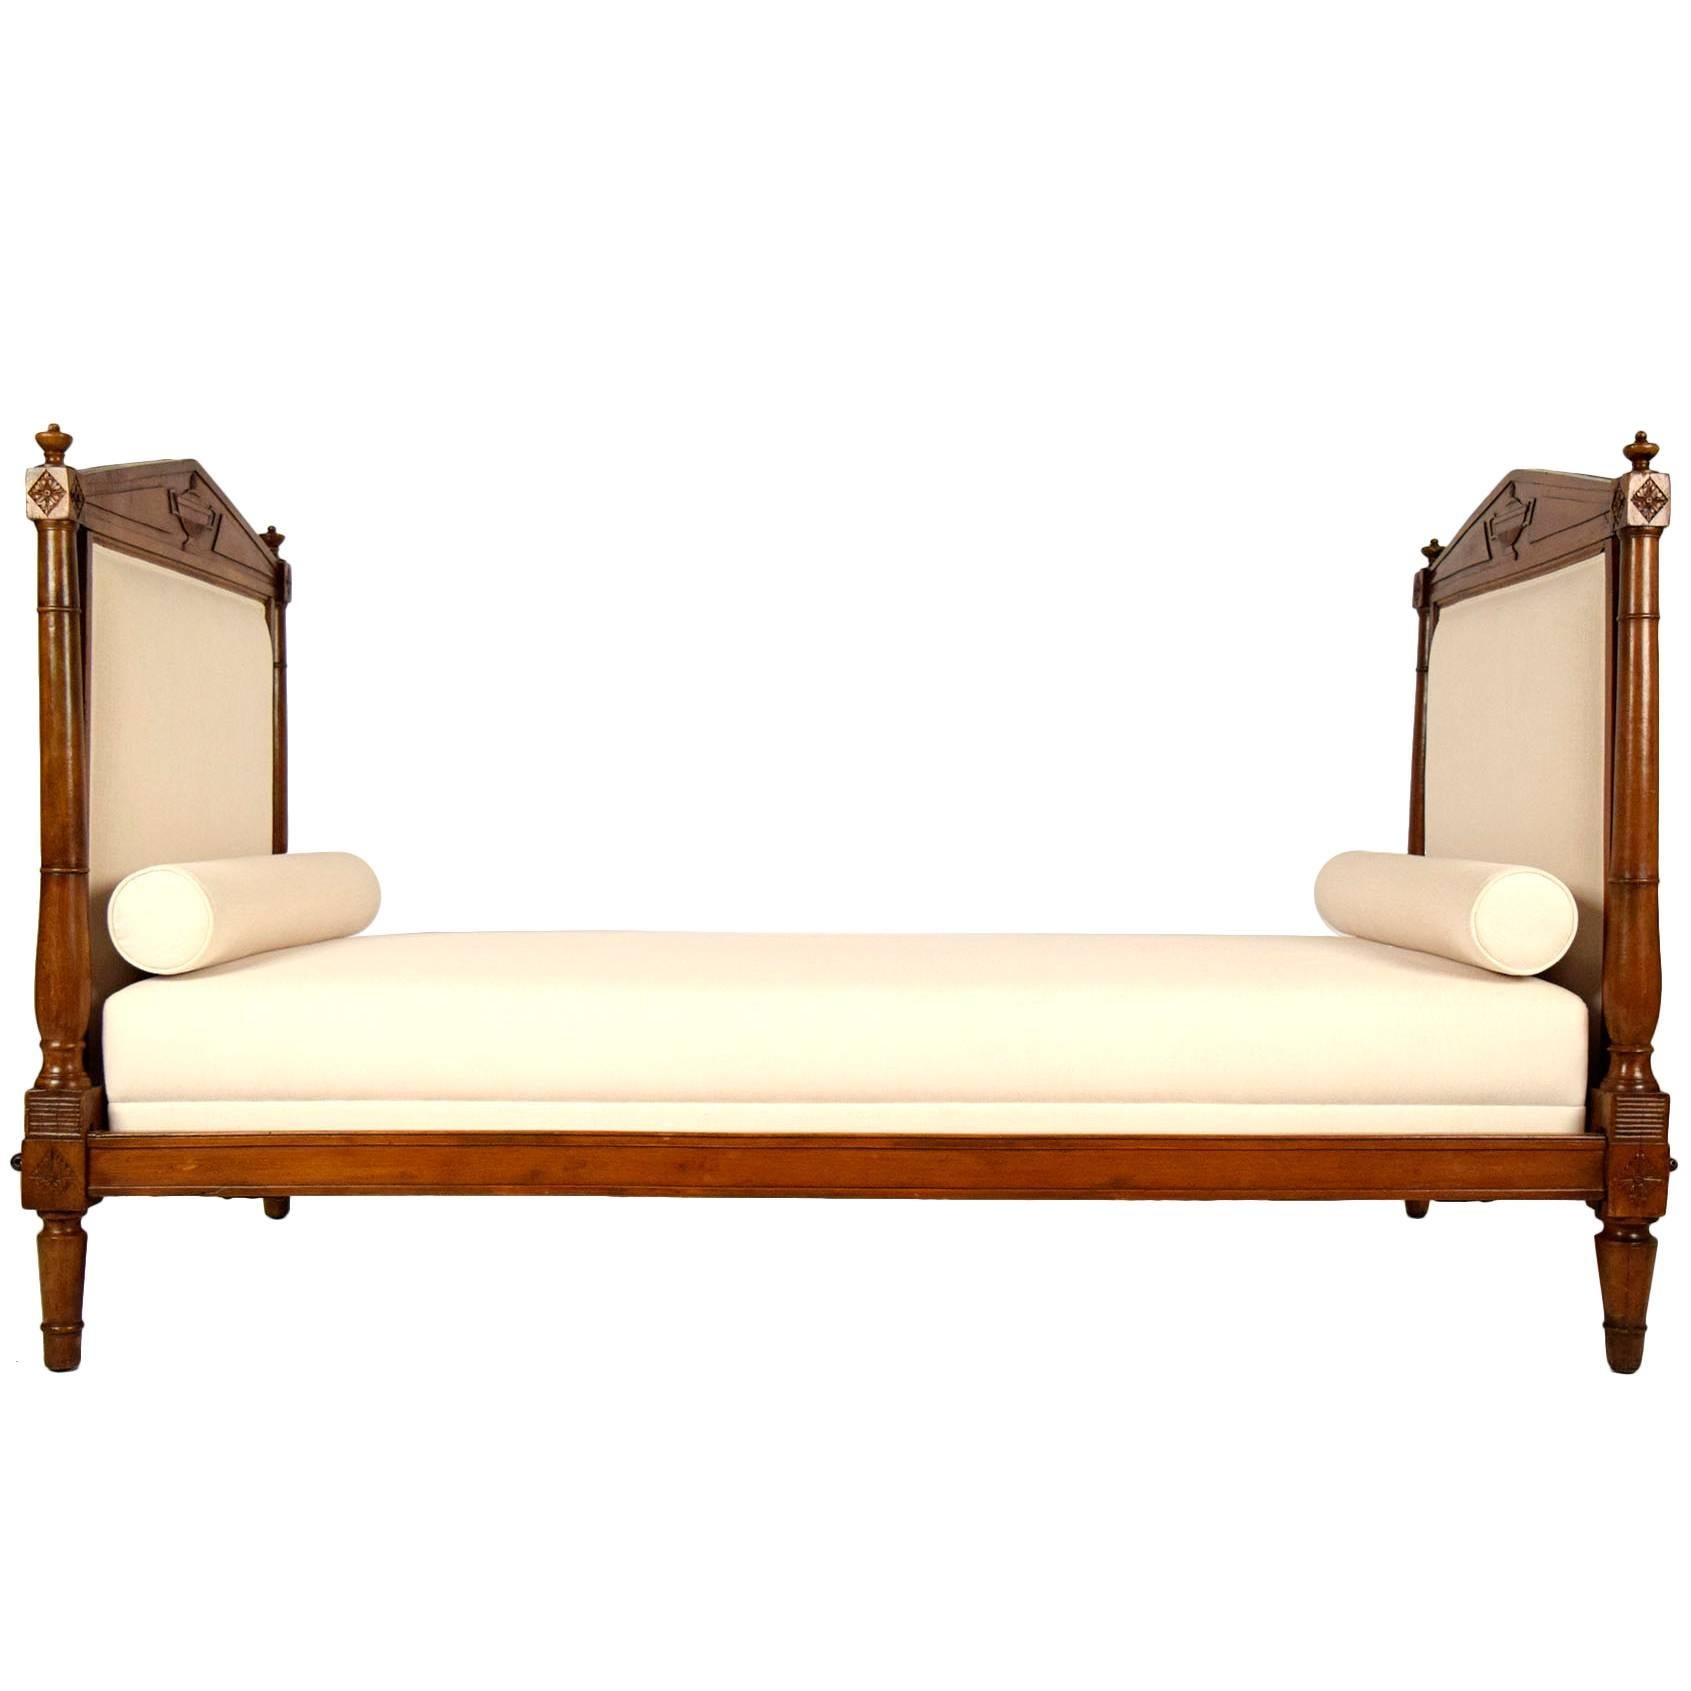 French Mid-19th Century Empire Directoire Daybed